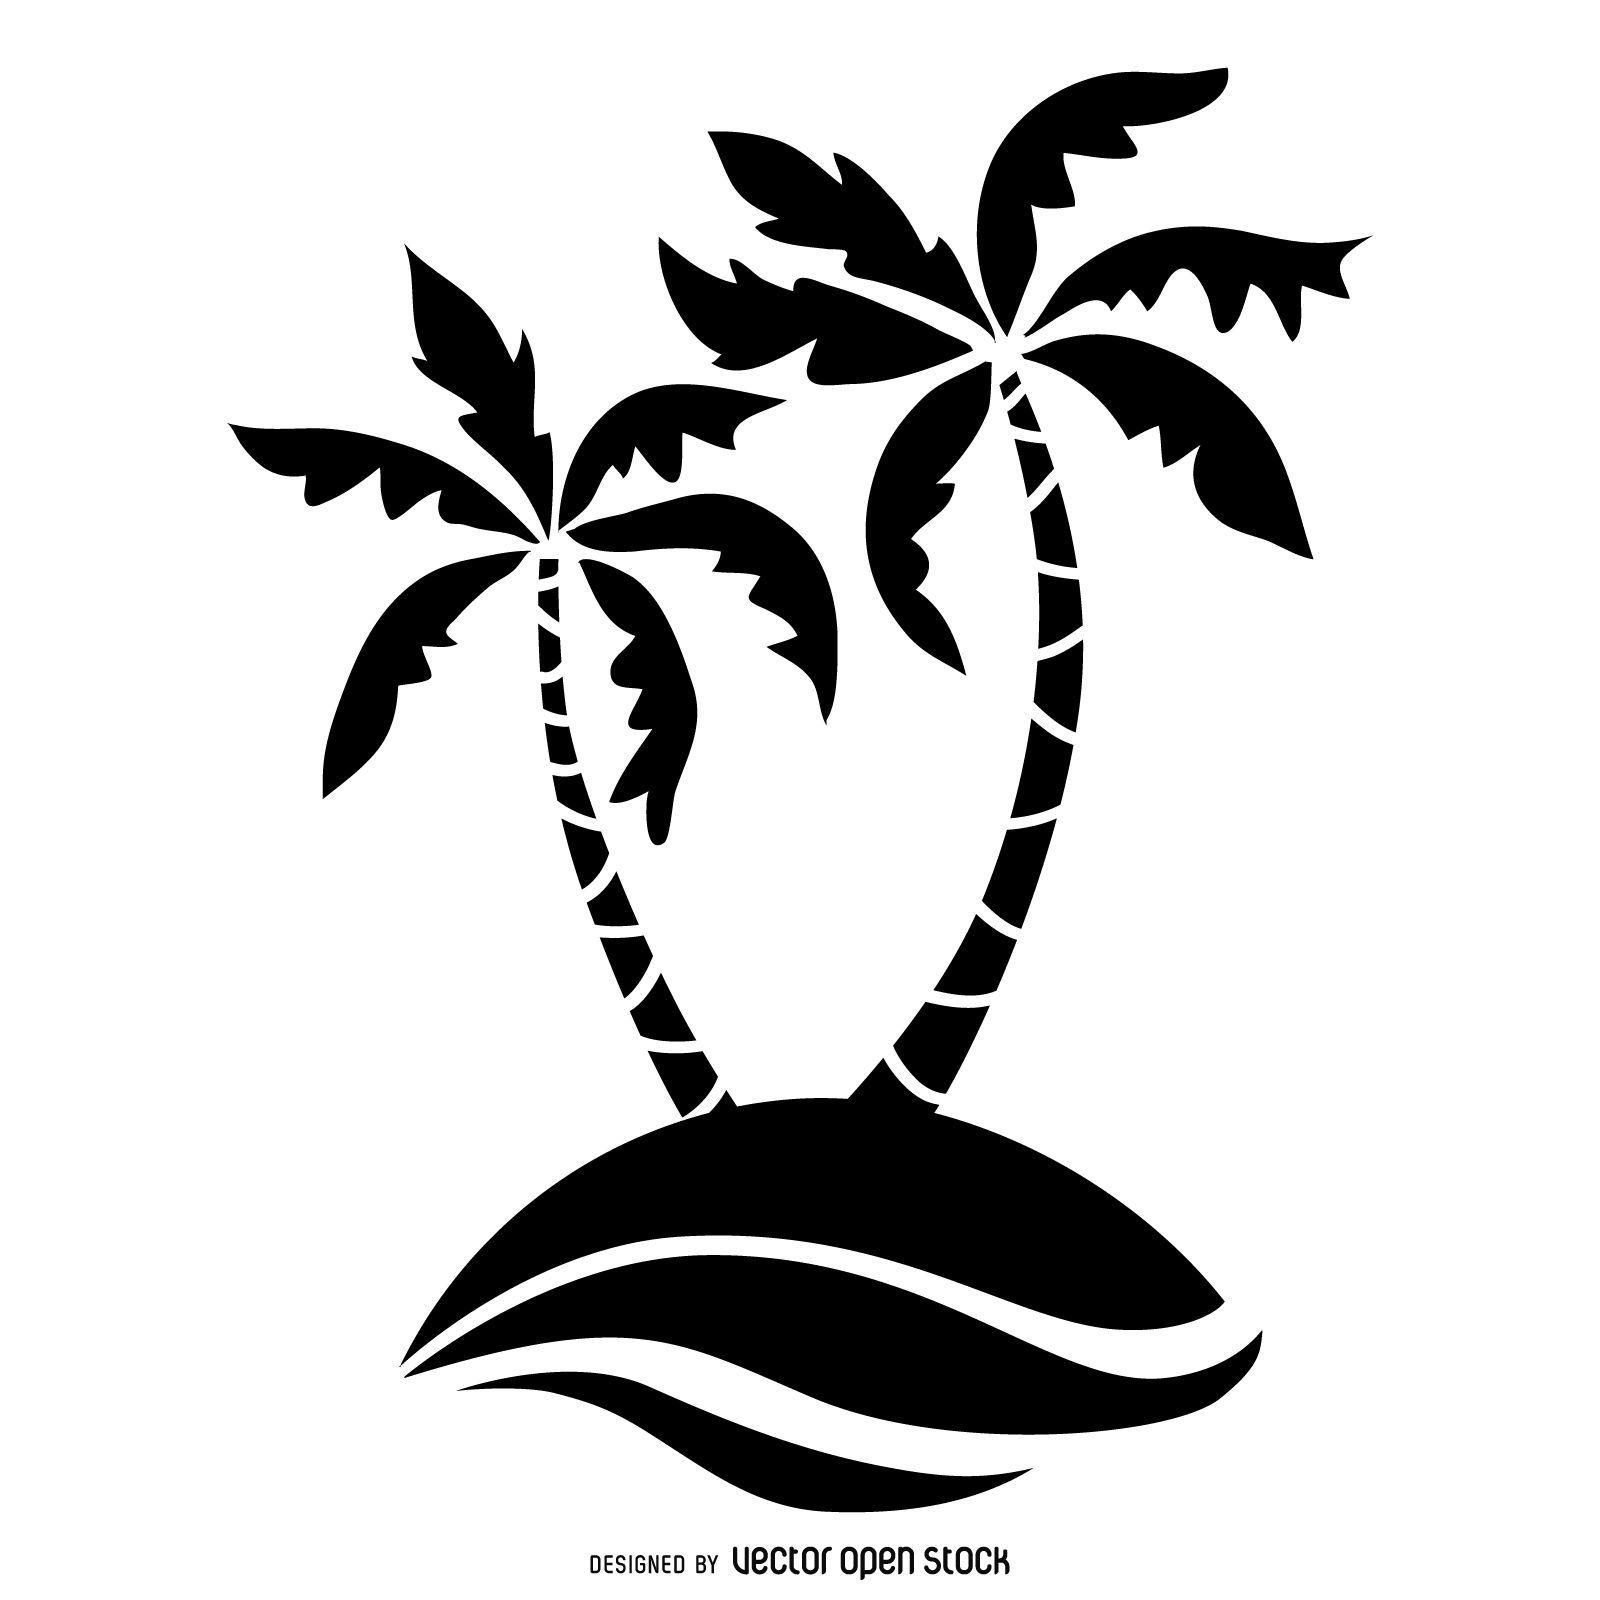 Black and White Palm Tree Logo - Flat illustrated palm trees in black over white. Silhouette includes